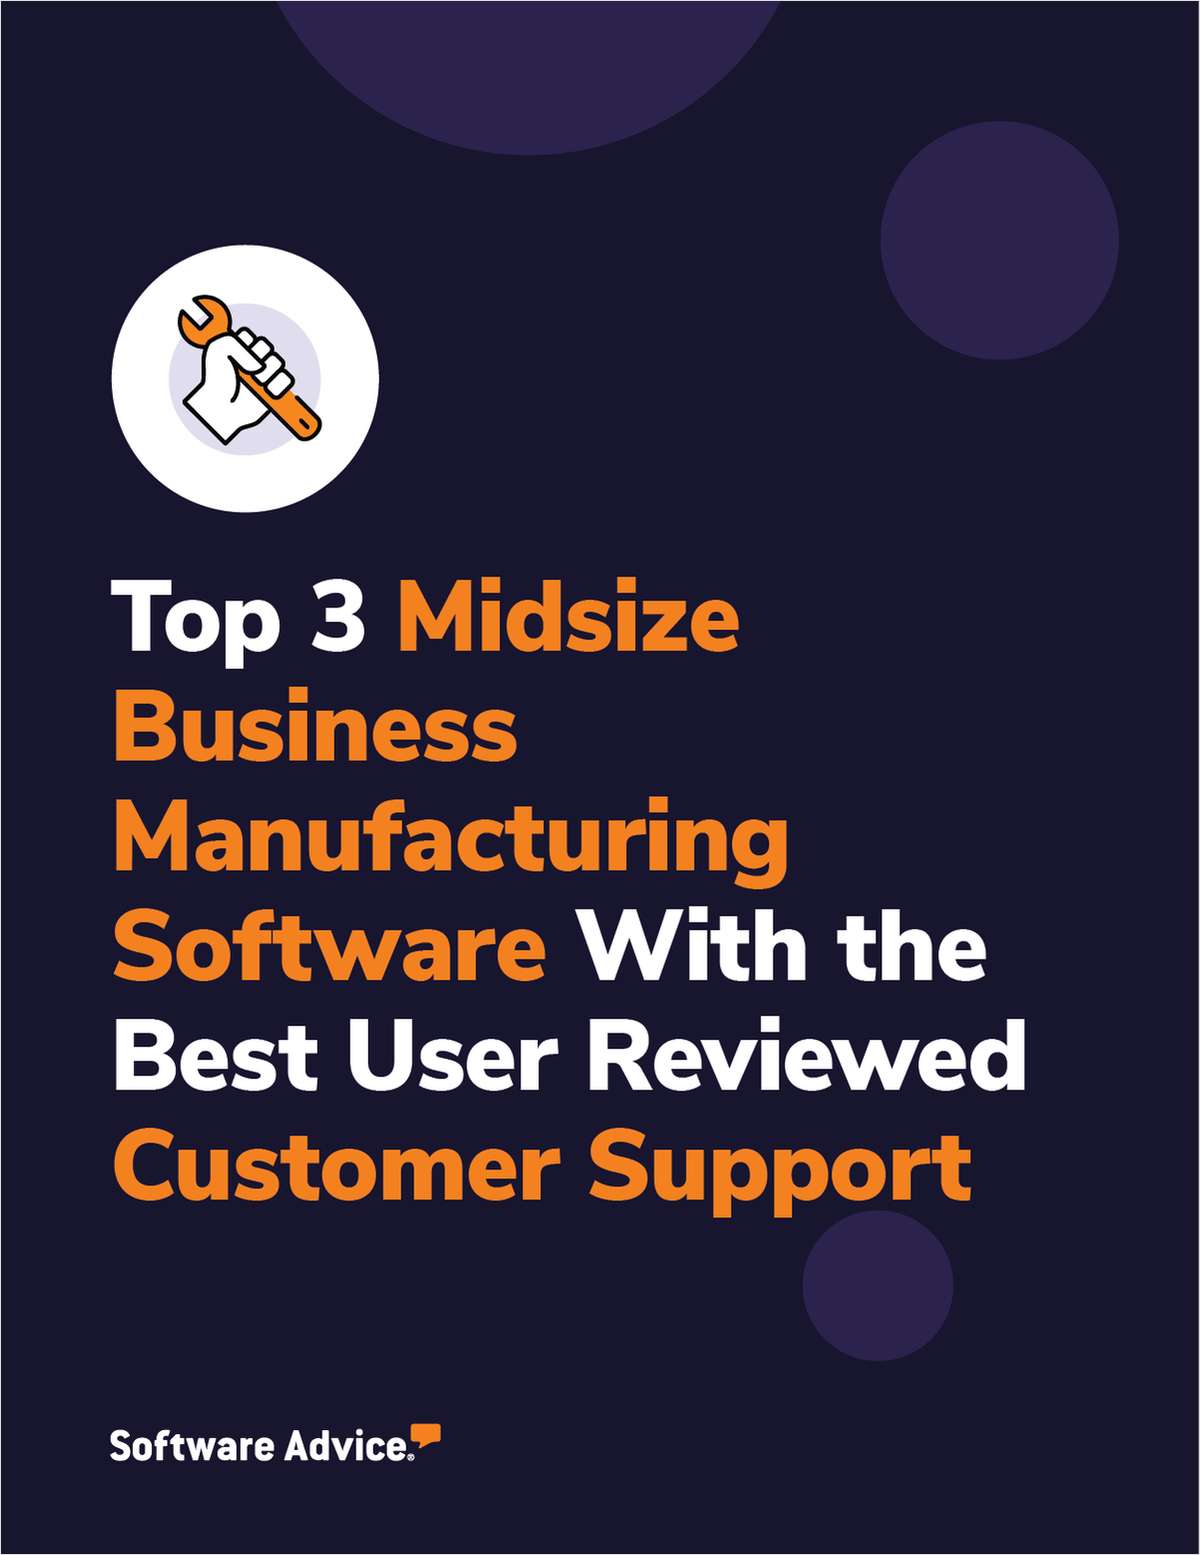 Top 3 Midsize Business Manufacturing Software With the Best User Reviewed Customer Support